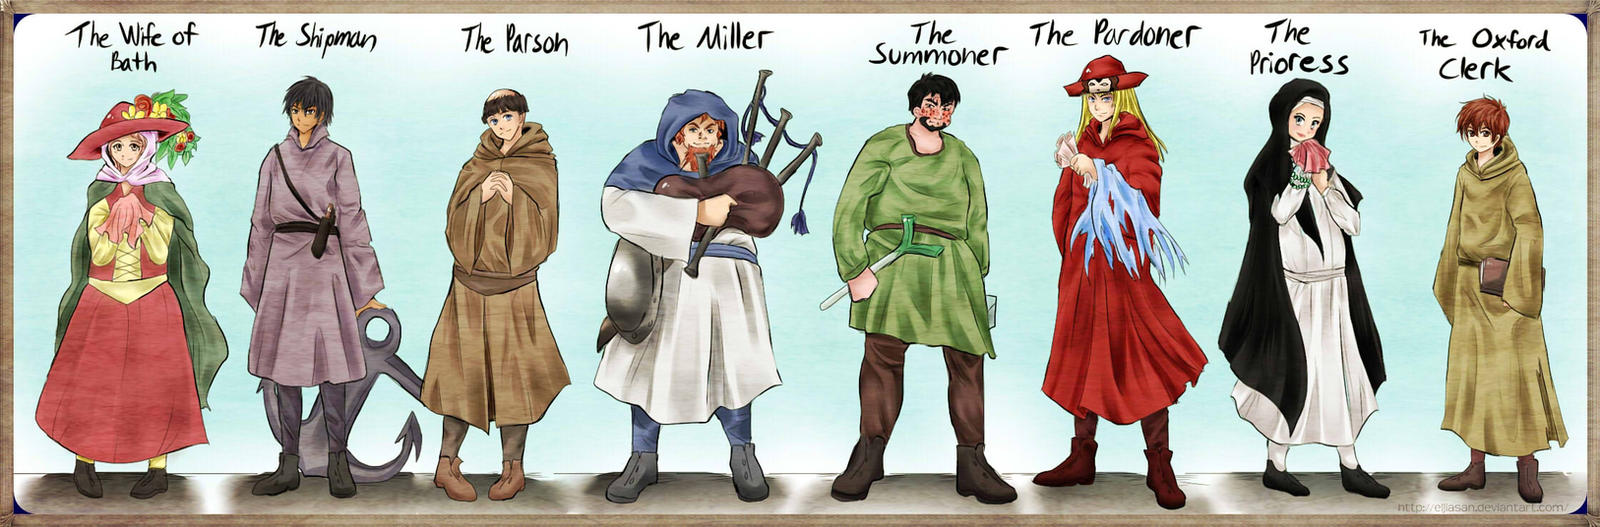 Characters of the canterbury tales